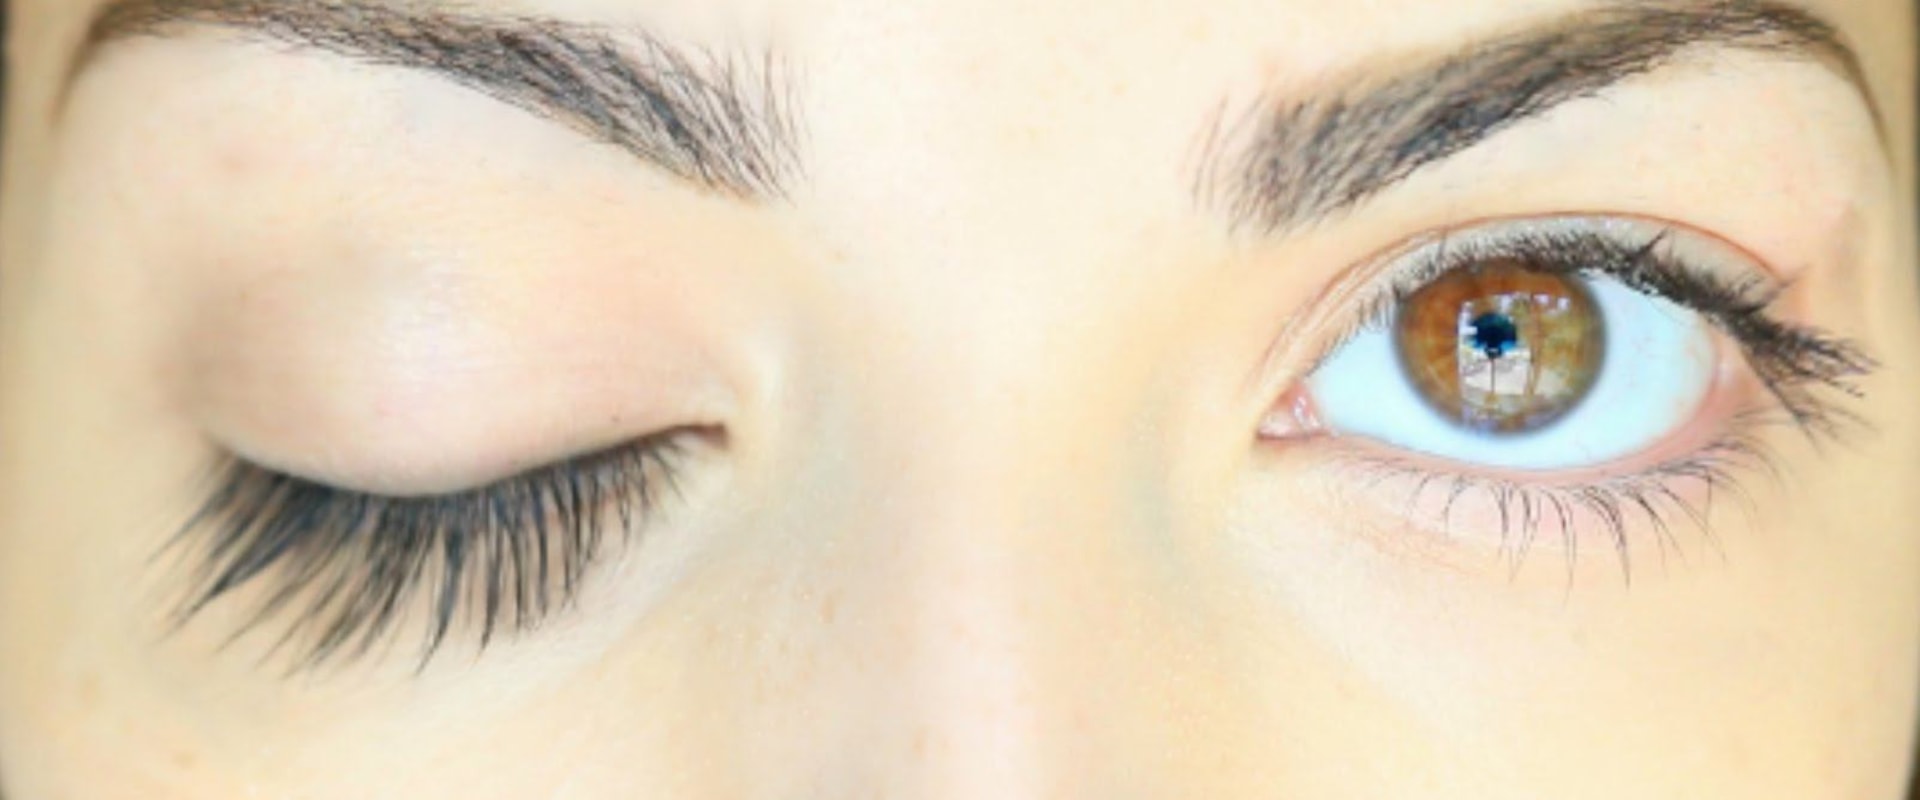 How Long Does it Take for Natural Eyelashes to Grow Back?